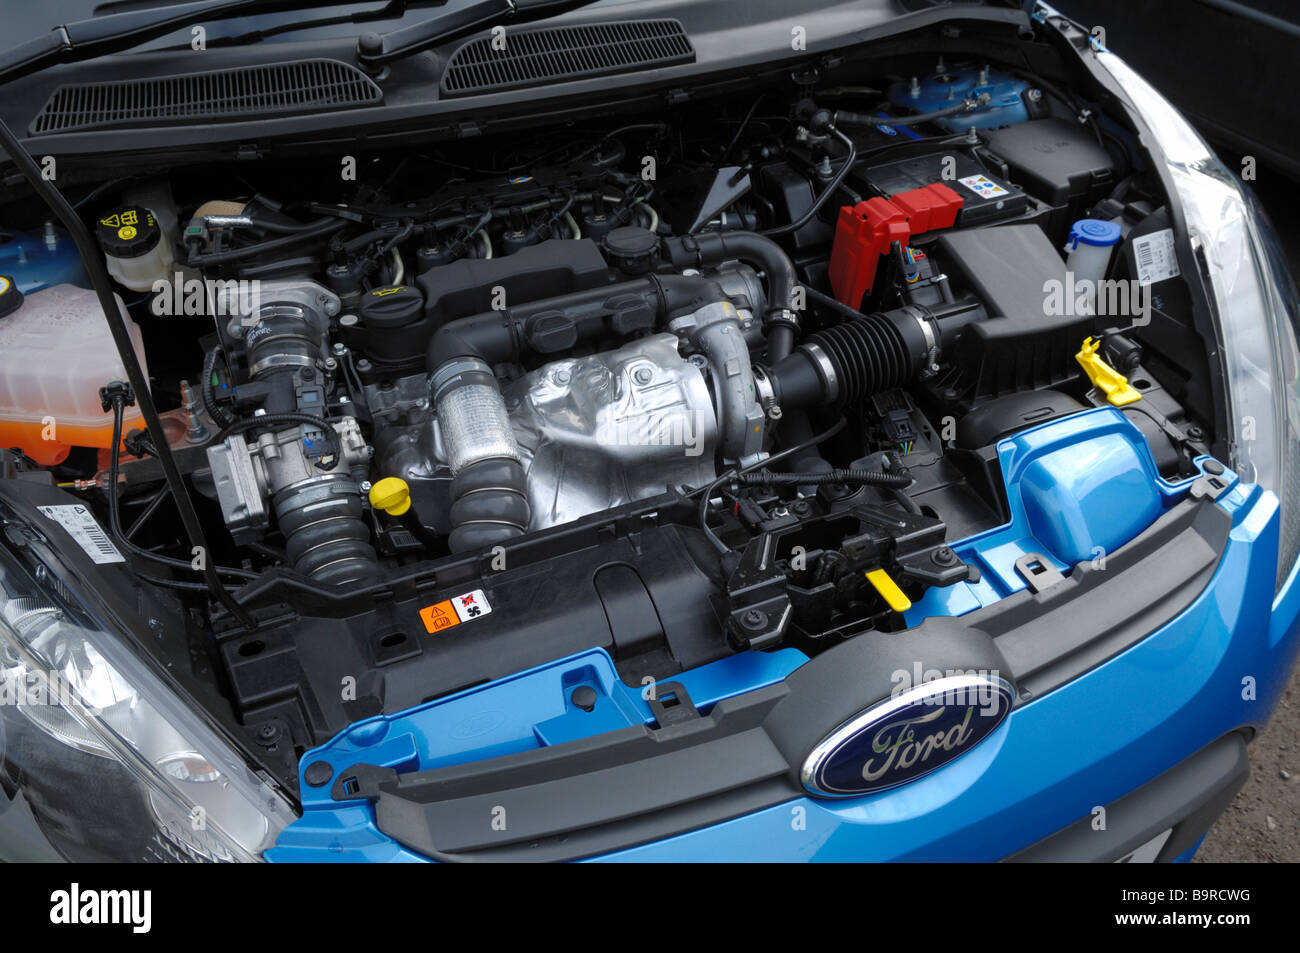 The diesel engine from the Ford Fiesta 1.6 TDCi ECOnetic, one of the greenest cars available in Europe at it's launch in 2009 producing only 98g/km CO2 with a combined fuel consumption of 3.7L/100km (76.3mpg). Stock Photo